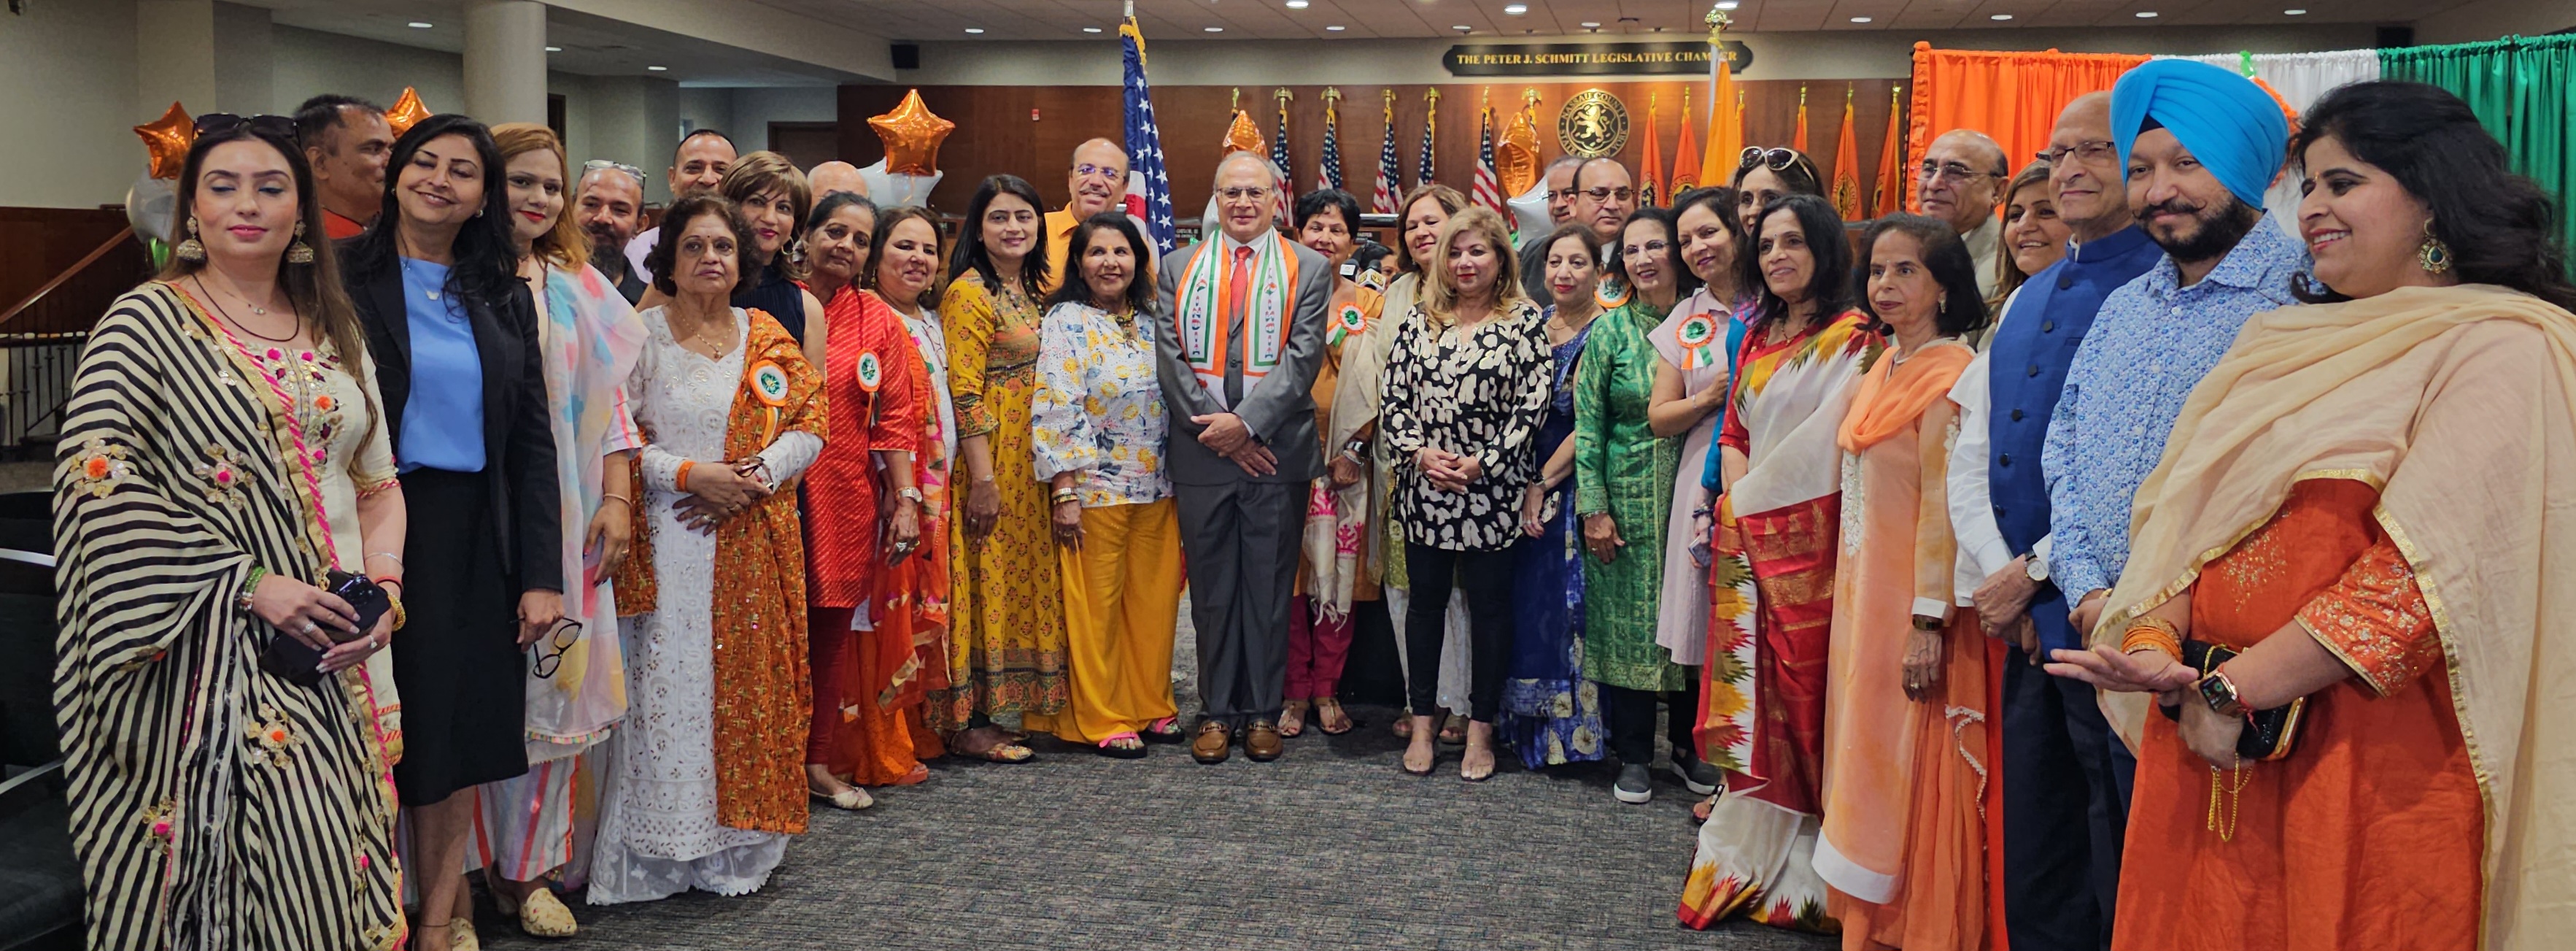 Hicksville all set to host 76th Indian Independence Day in Hicksville